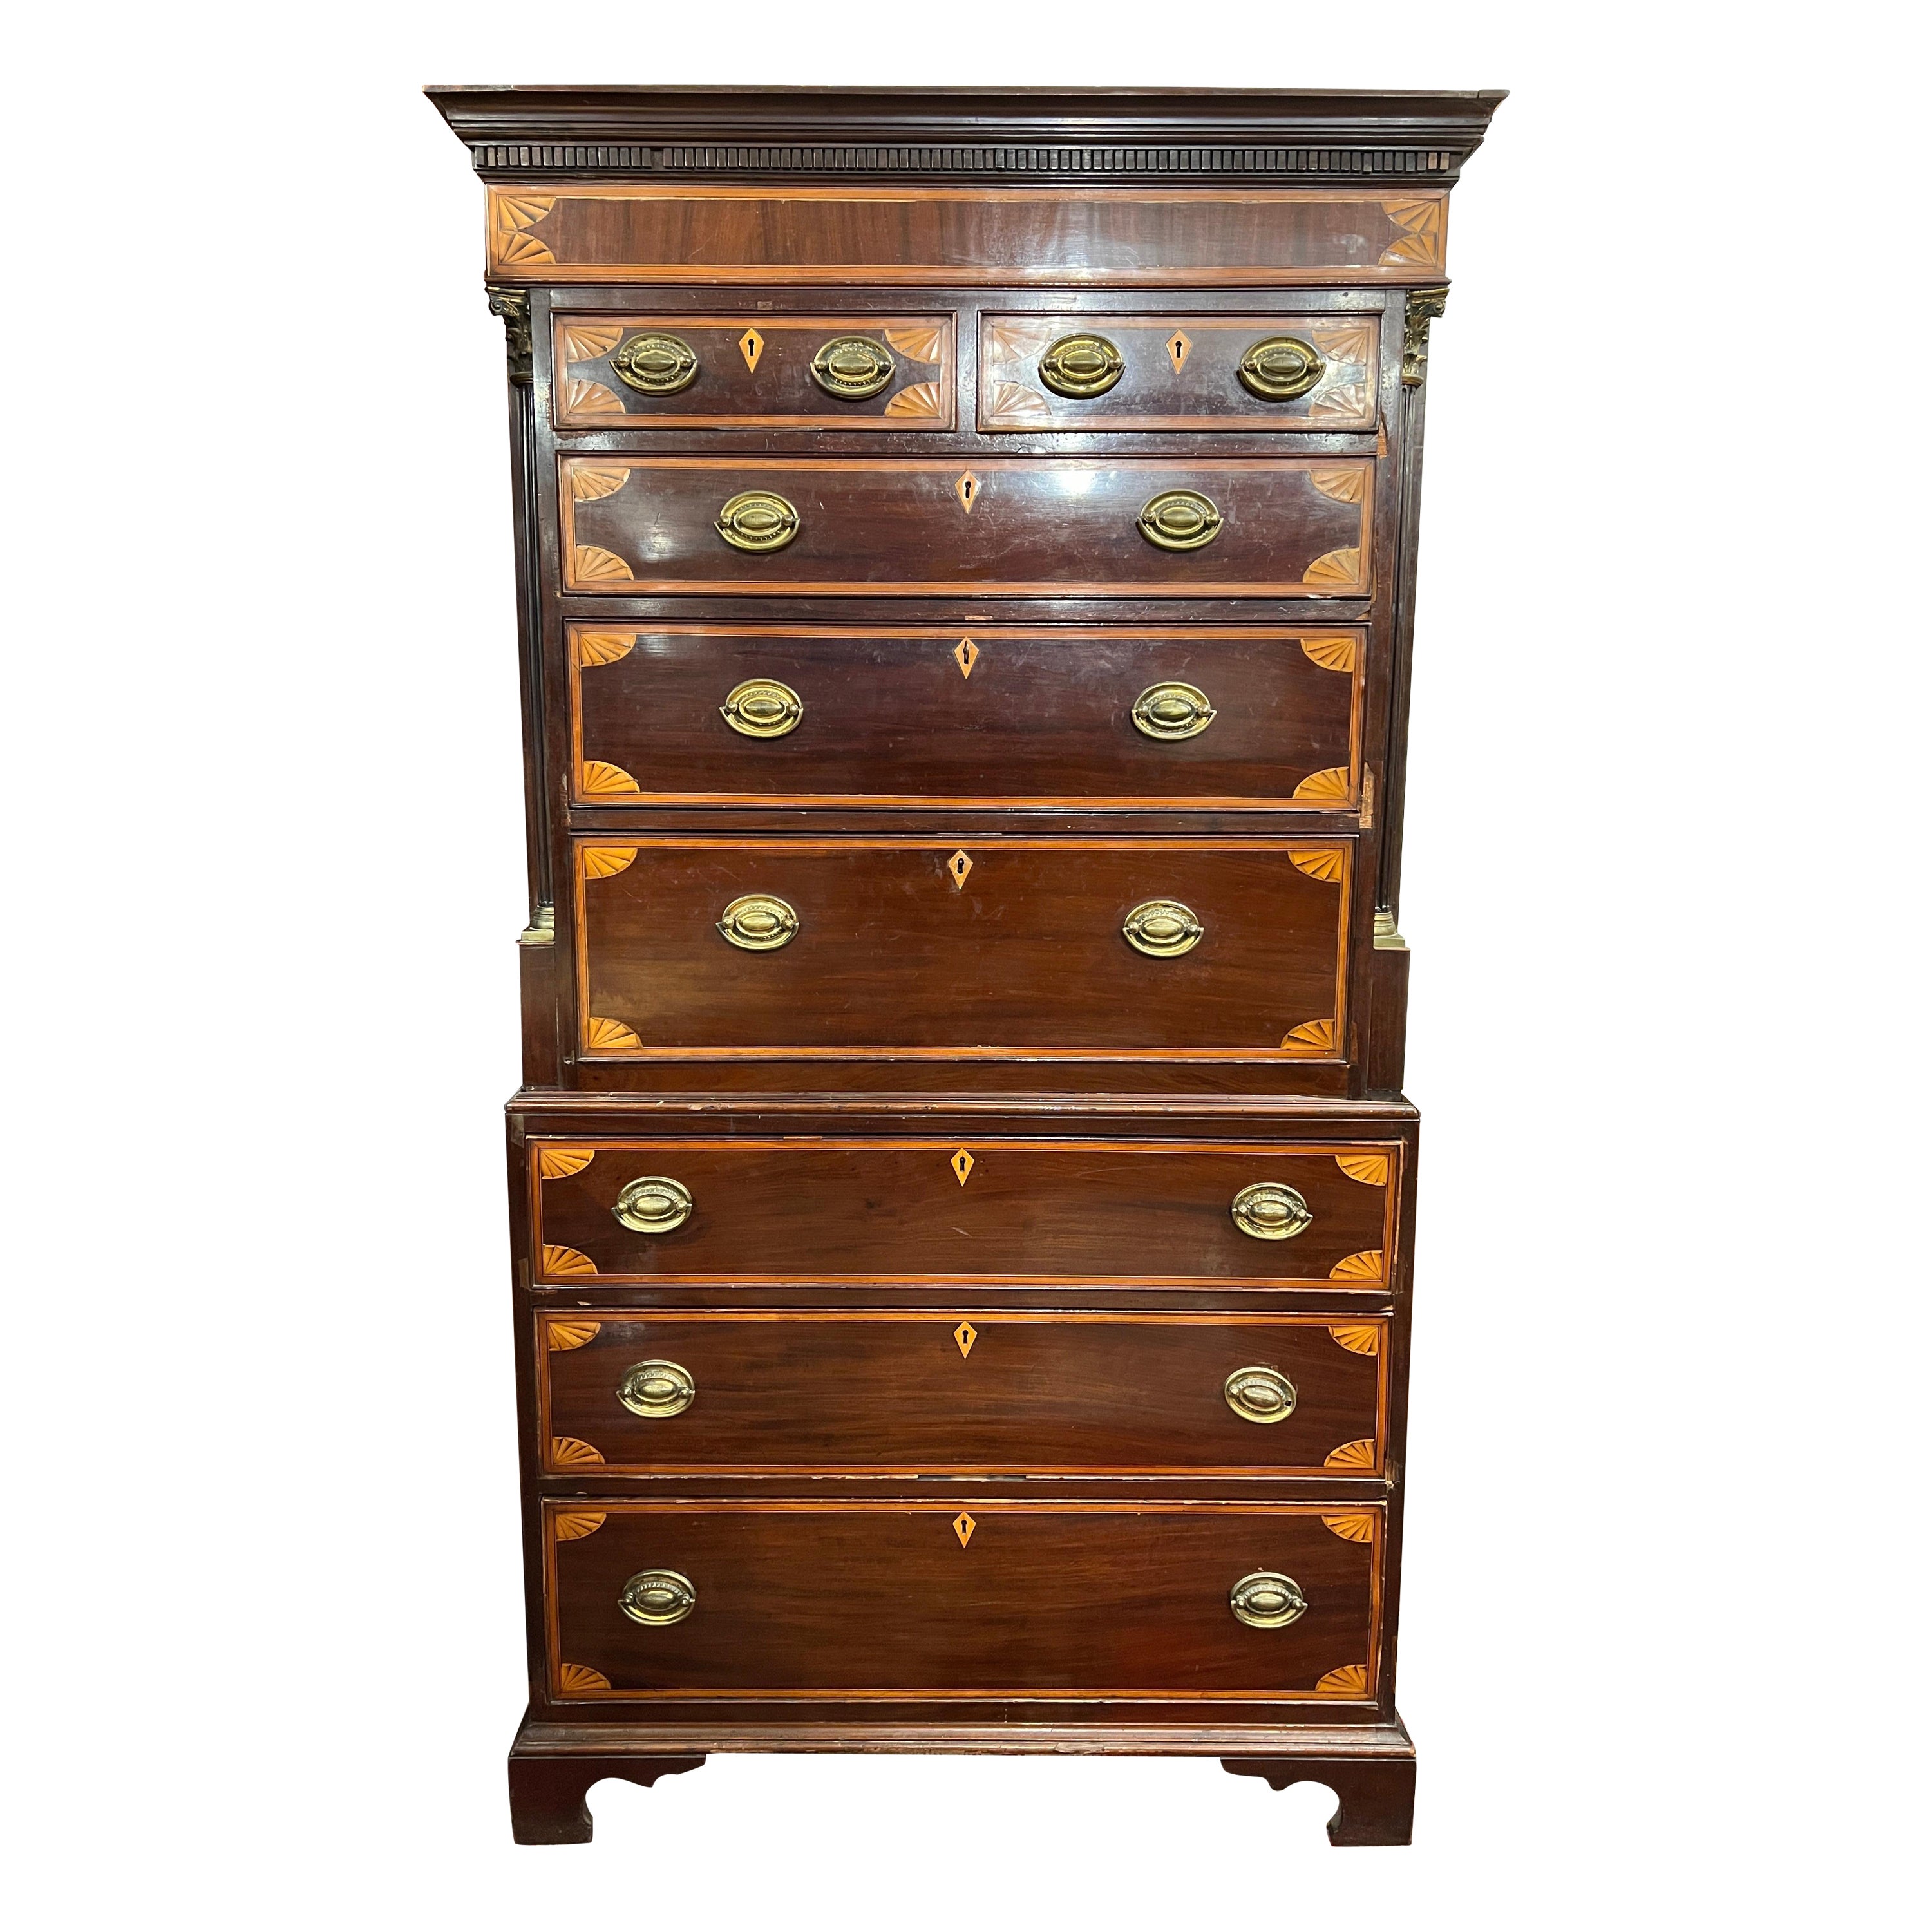 18th Century English George III Mahogany Inlaid Secretaire Chest of Drawers 1700 For Sale